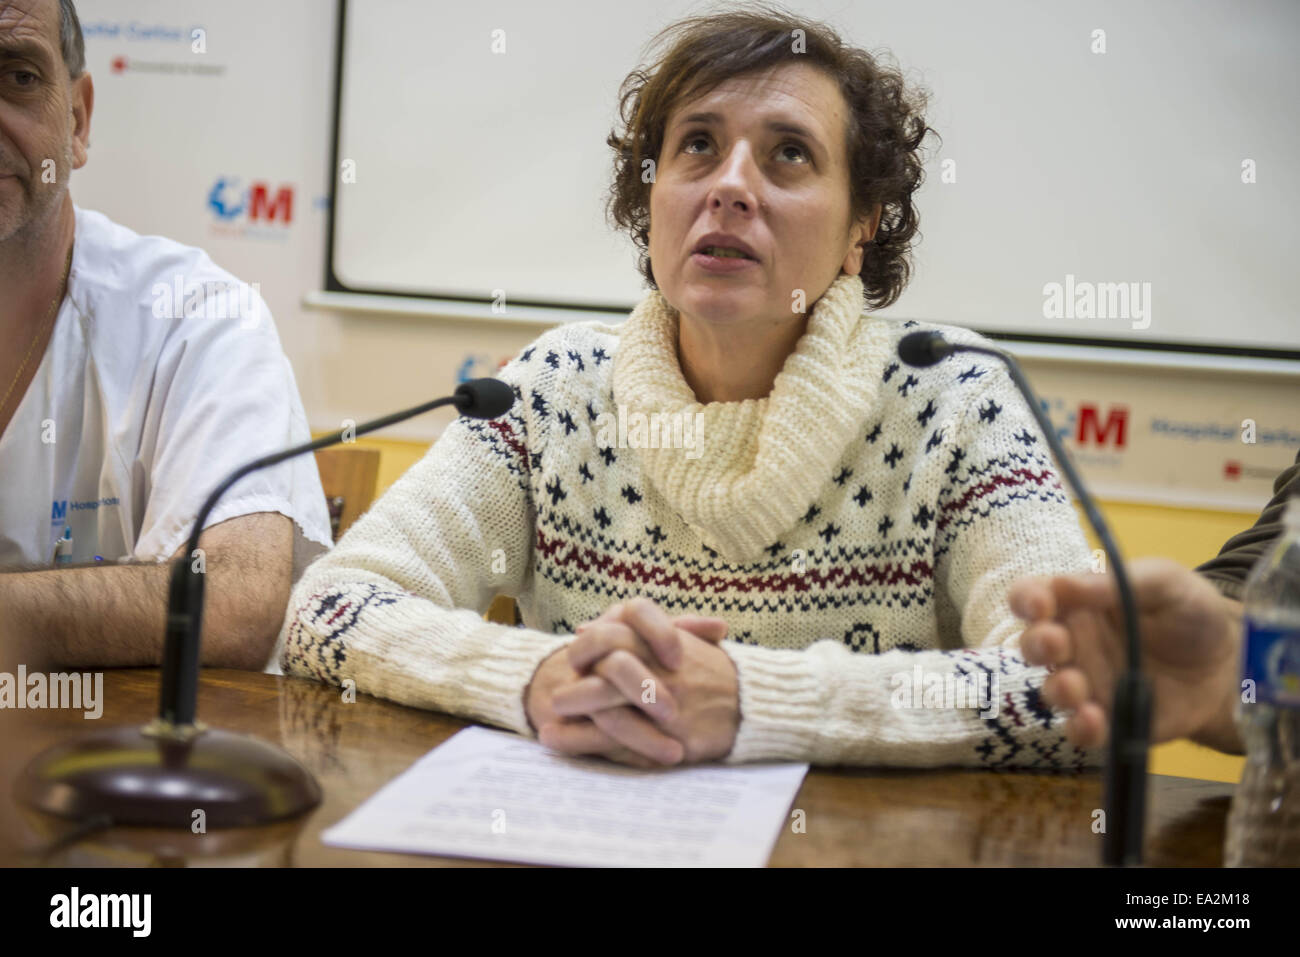 Madrid, Spain. 5th Nov, 2014. TERESA ROMERO, a Spanish auxiliary nurse who was the first person to be infected by Ebola outside of Africa, spoke after she was released from Carlos III hospital. © Nacho Guadano/ZUMA Wire/Alamy Live News Stock Photo